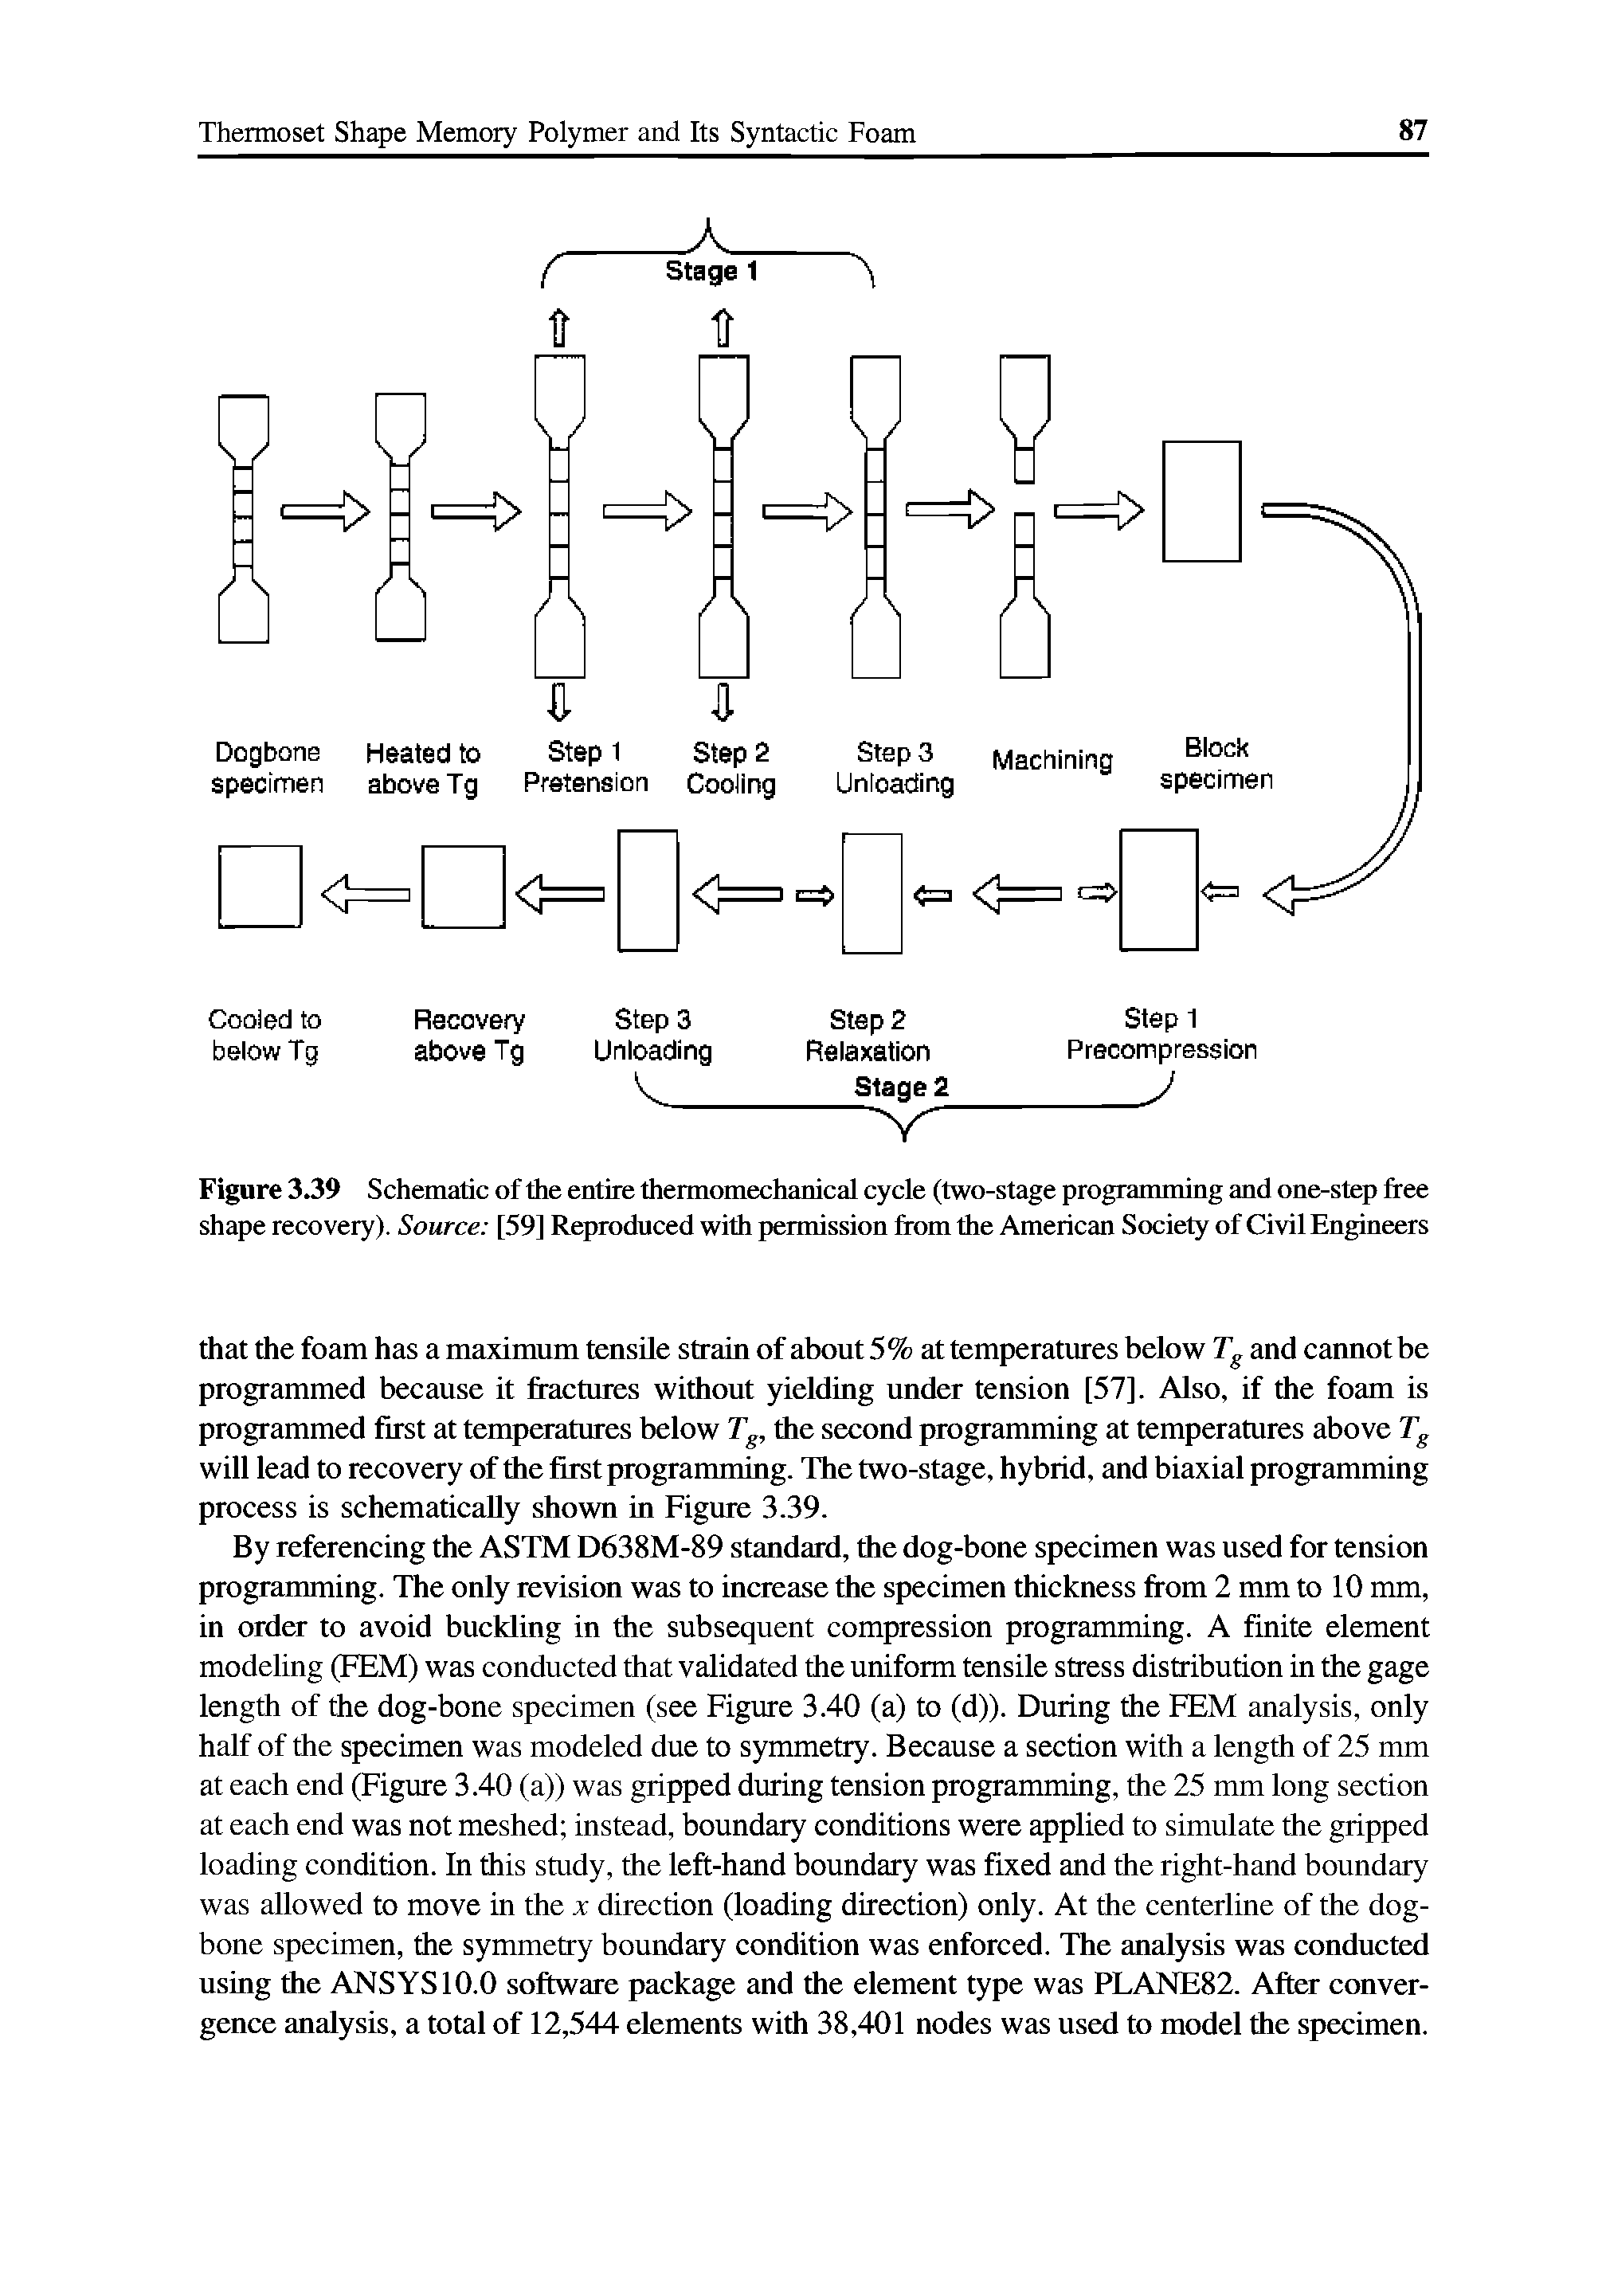 Figure 3.39 Schematic of the entire thermomechanical cycle (two-stage programming and one-step free shape recovery). Source [59] Reproduced with permission from the American Society of Civil Engineers...